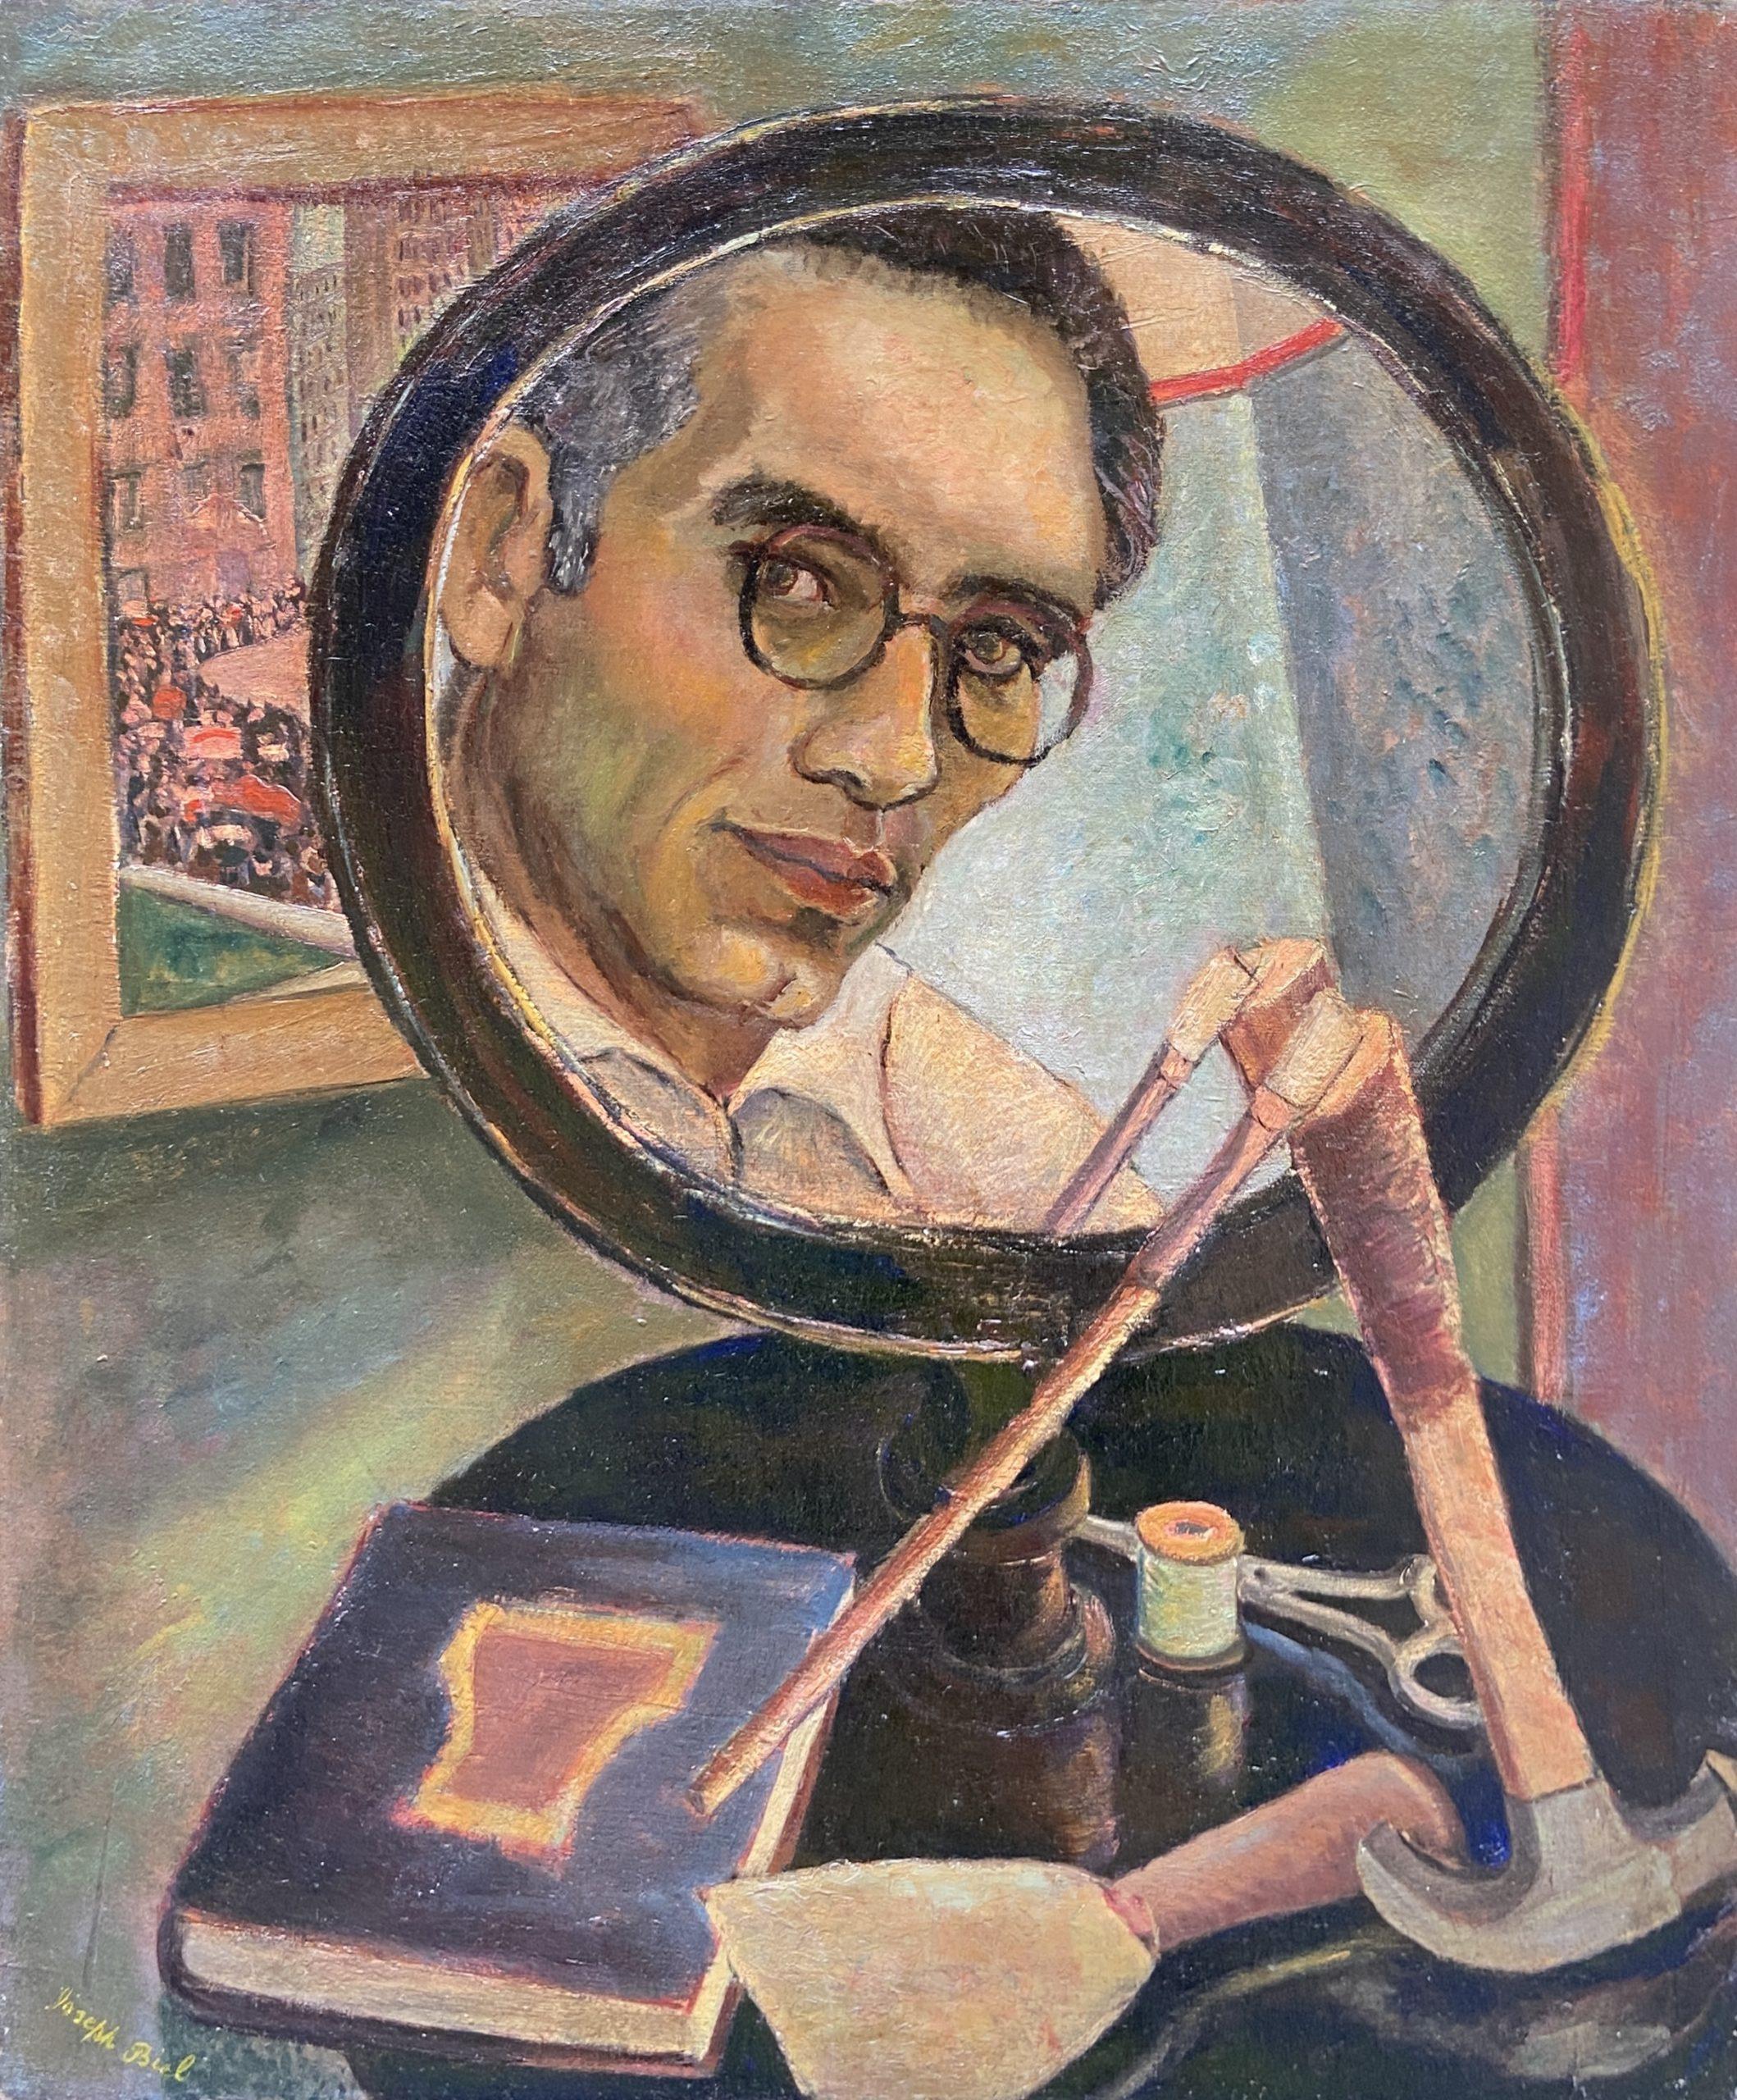 Joseph Biel Portrait Painting - Self Portrait in a Mirror with Artist's Tools, Oil on canvas, Signed, Polish